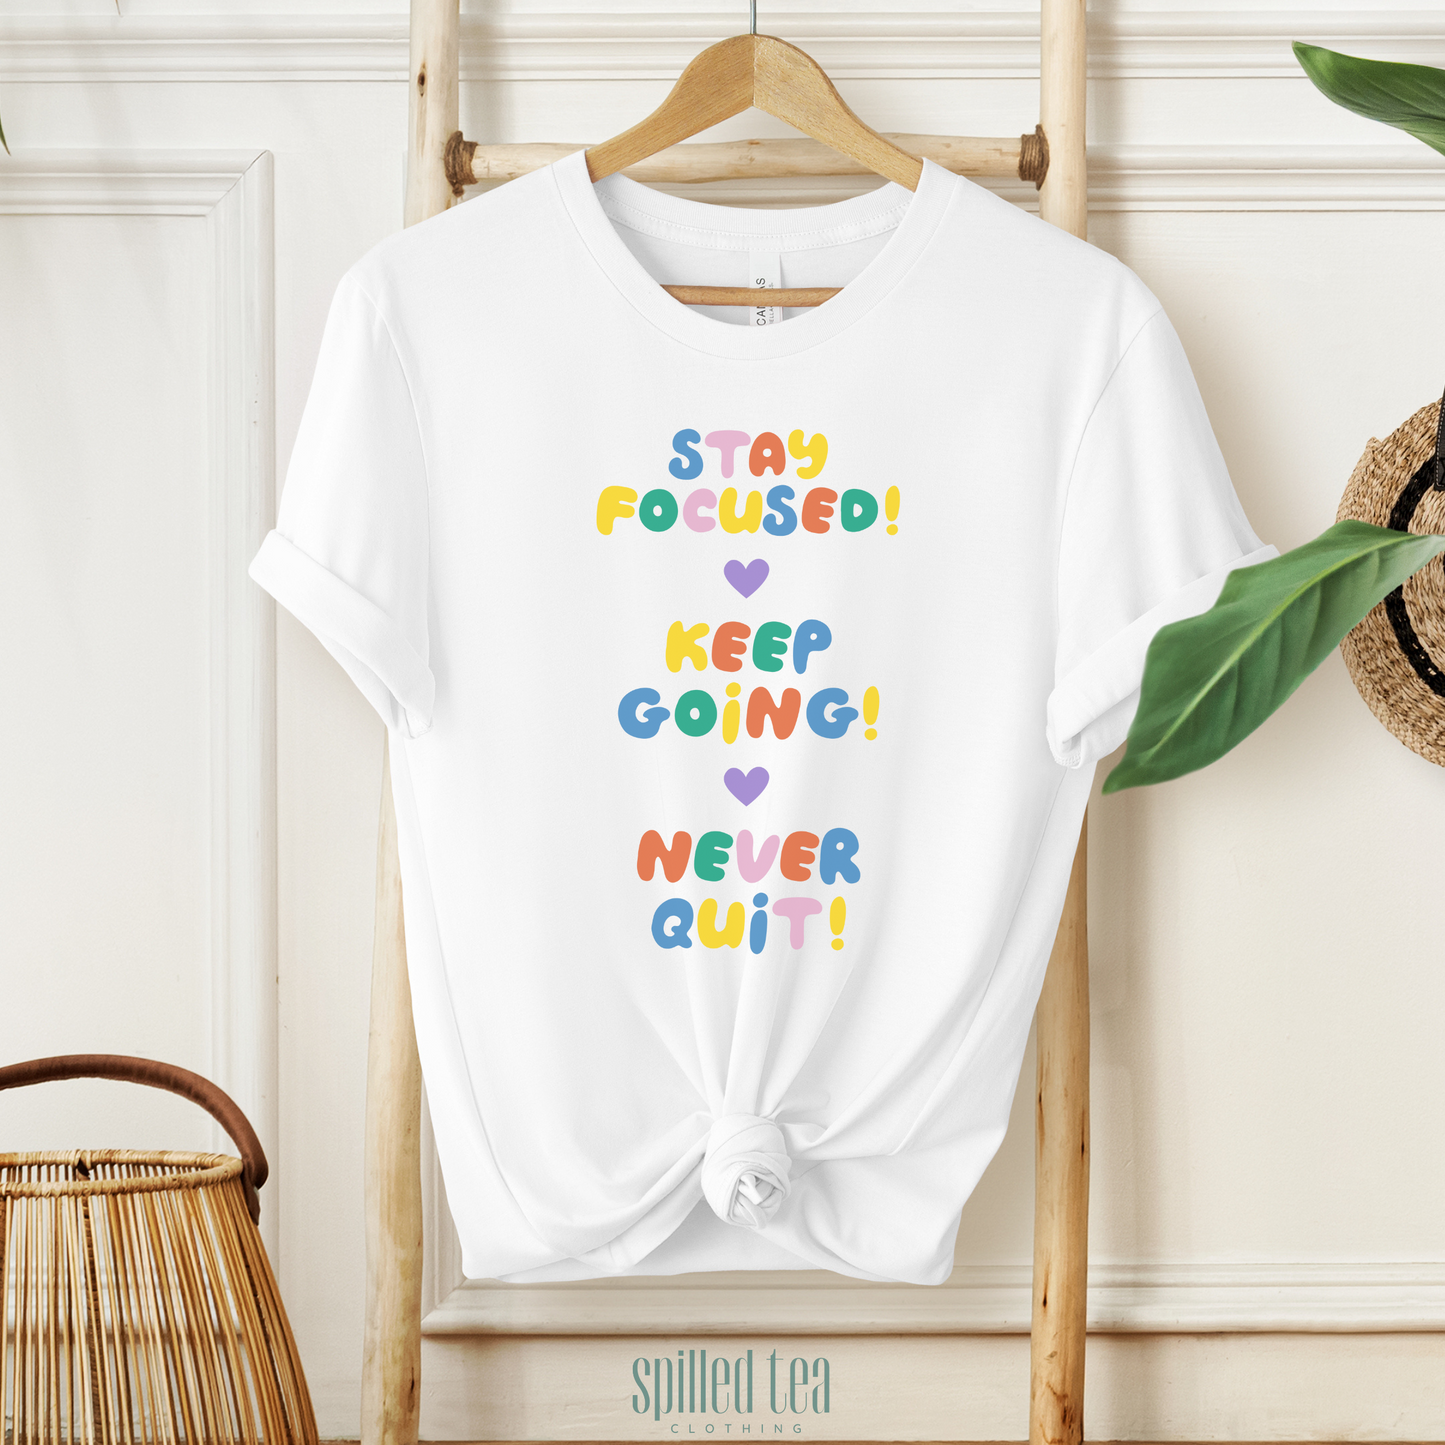 Stay Focused, Keep Going, Never Quit T-Shirt